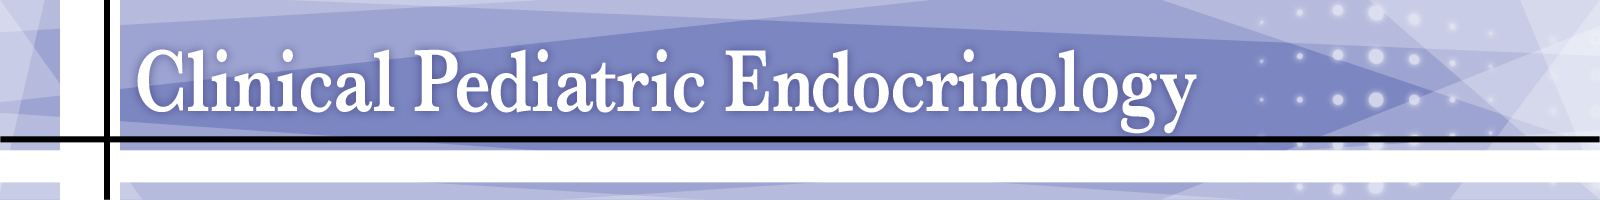 Clinical Pediatric Endocrinology